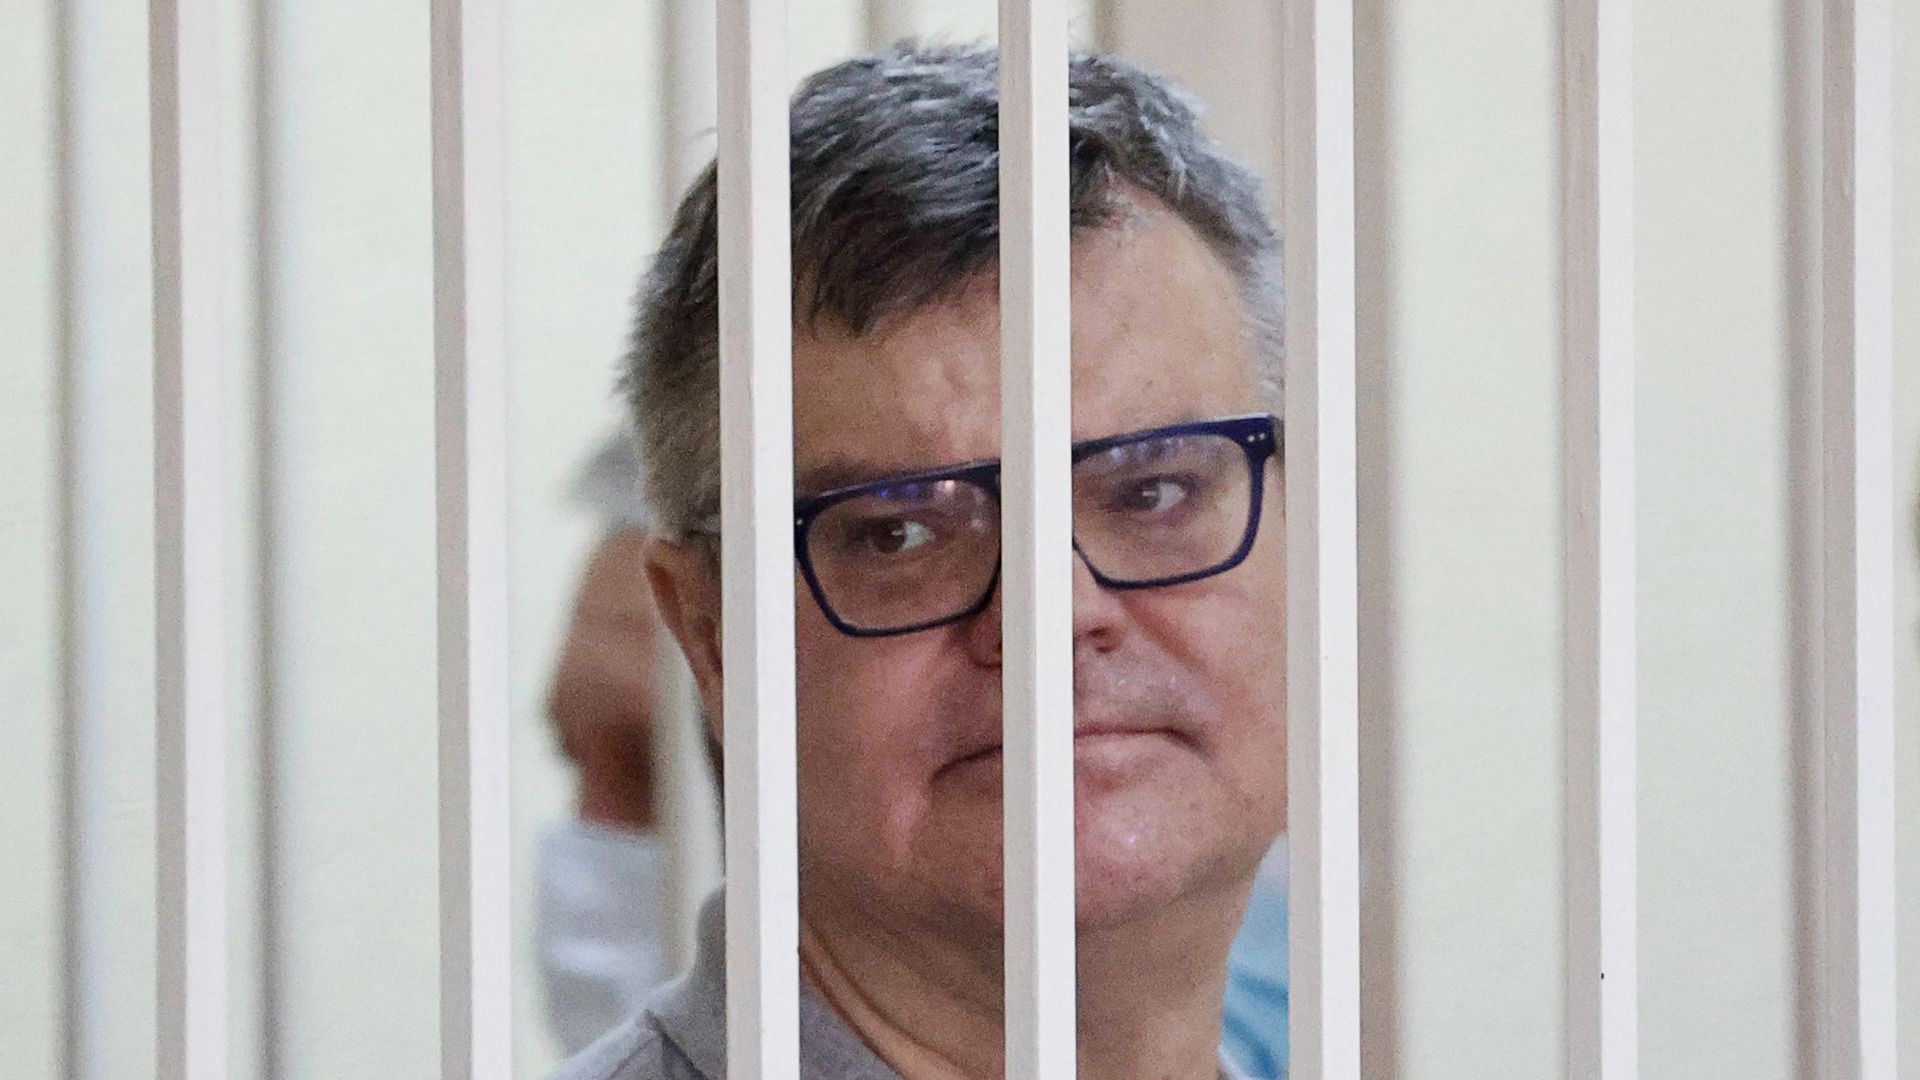  Former Belarusian presidential contender Viktor Babariko charged with 14-year prison sentence. 